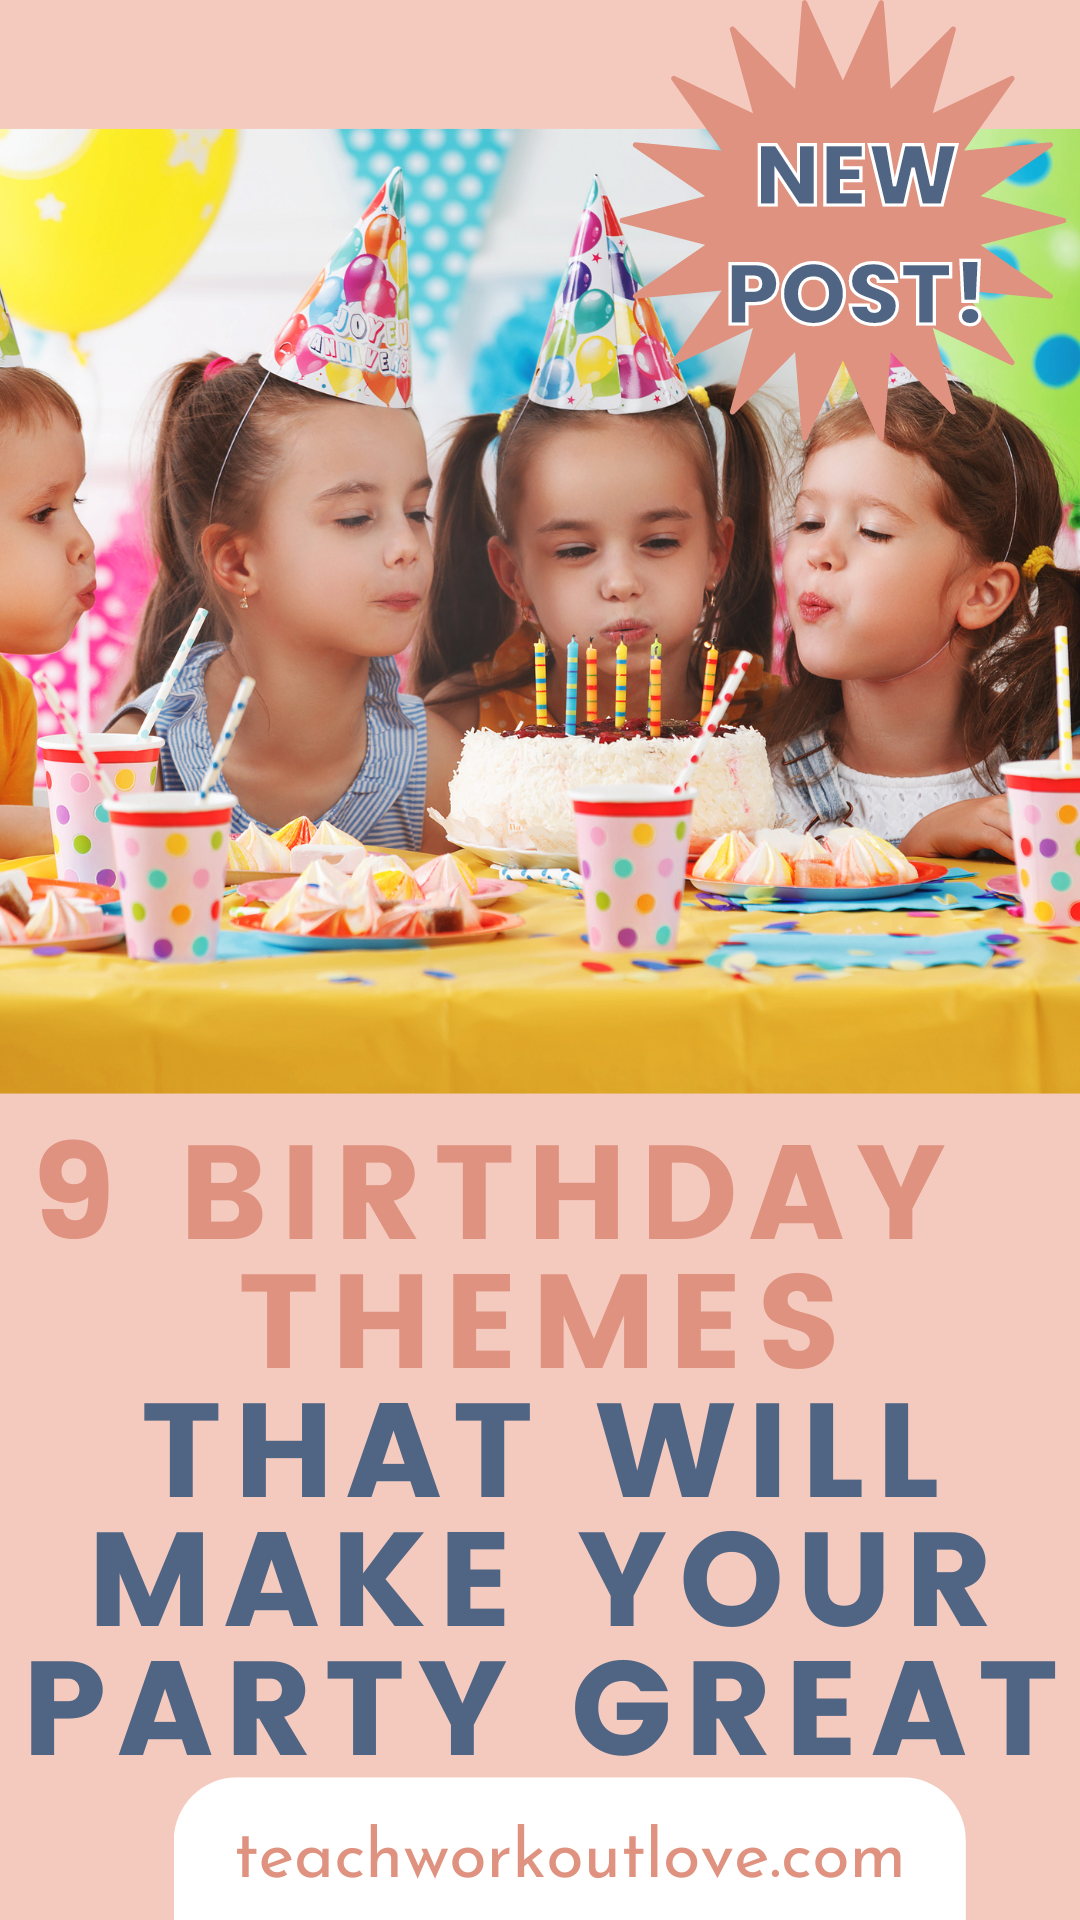 If you are in desperate need of some inspiration, the party theme ideas below are designed to make your next party unforgettable. Whether you are planning your kid’s birthday party or hosting a dinner party for adults, you will find something that your guests won’t stop talking about.